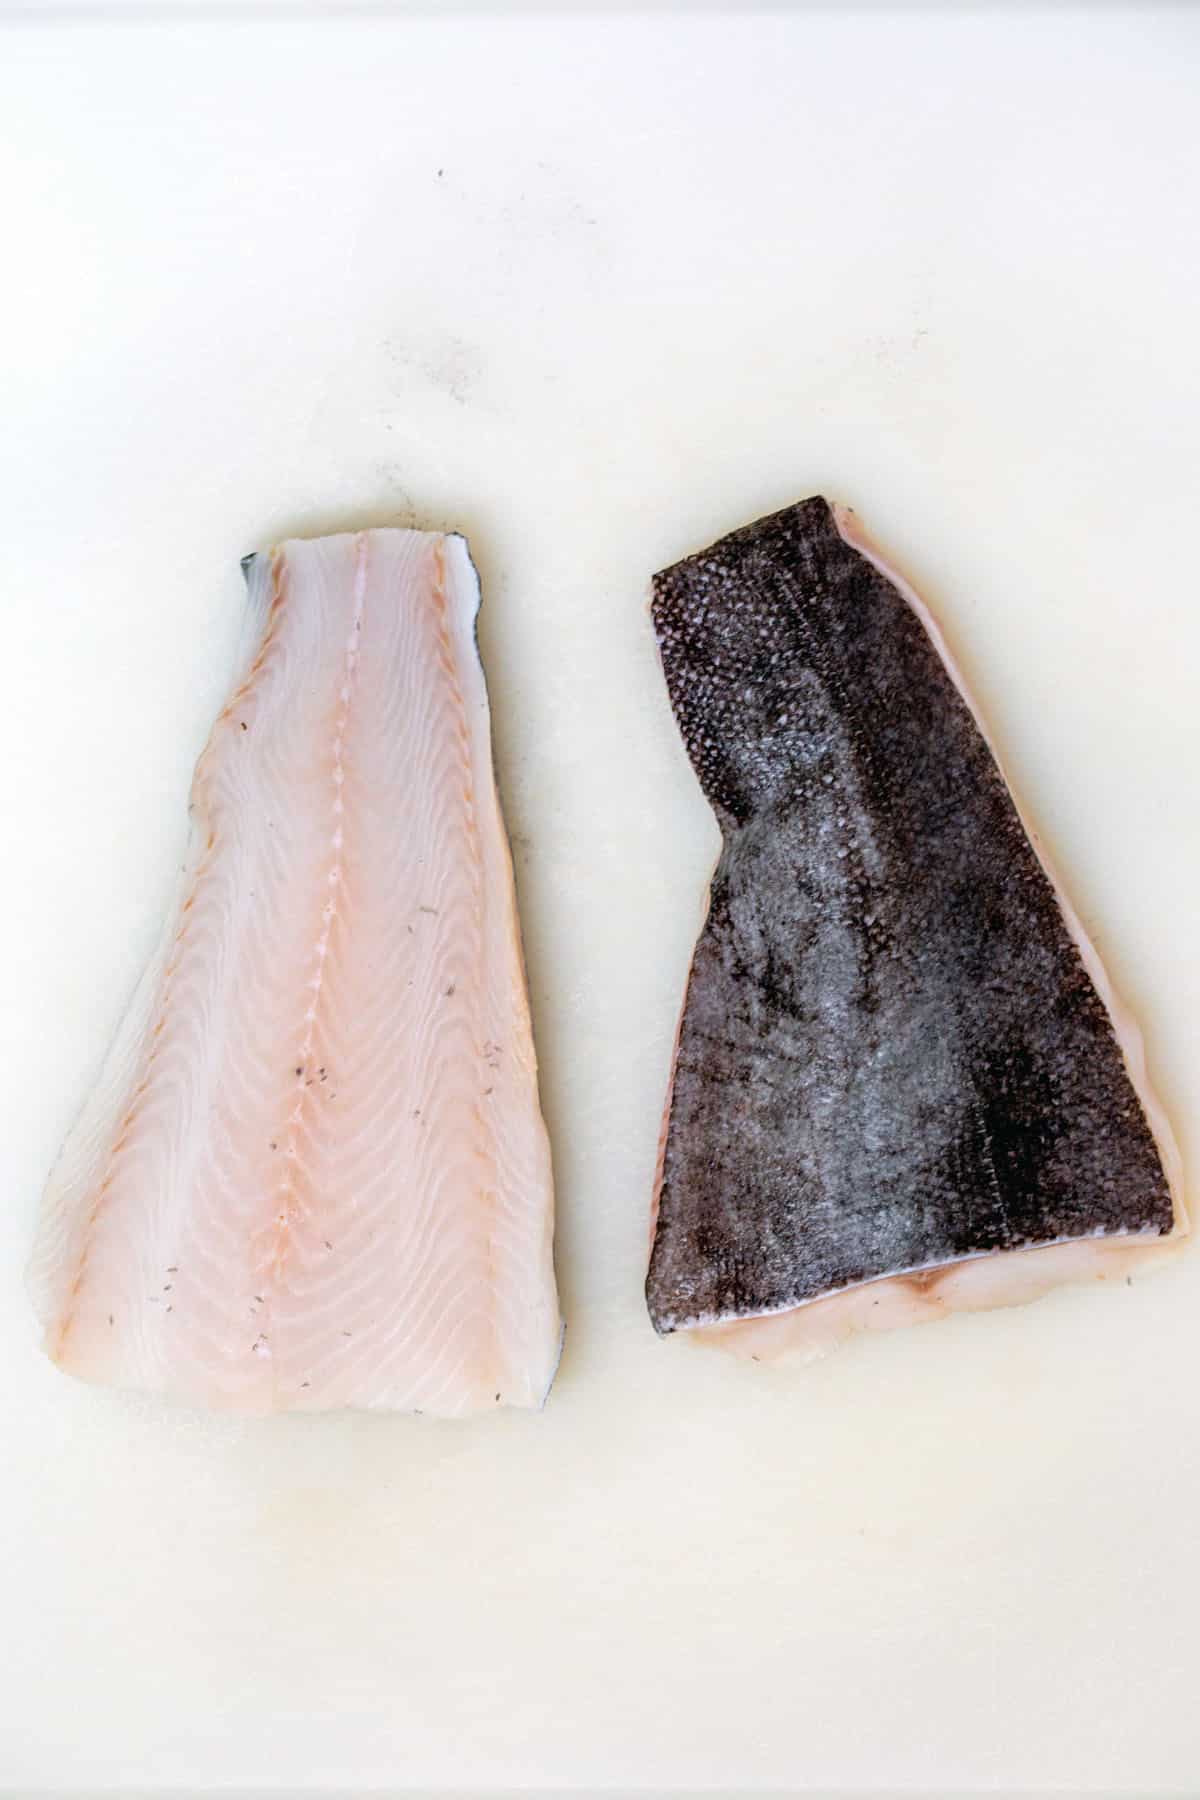 Sablefish fillets on a cutting board.